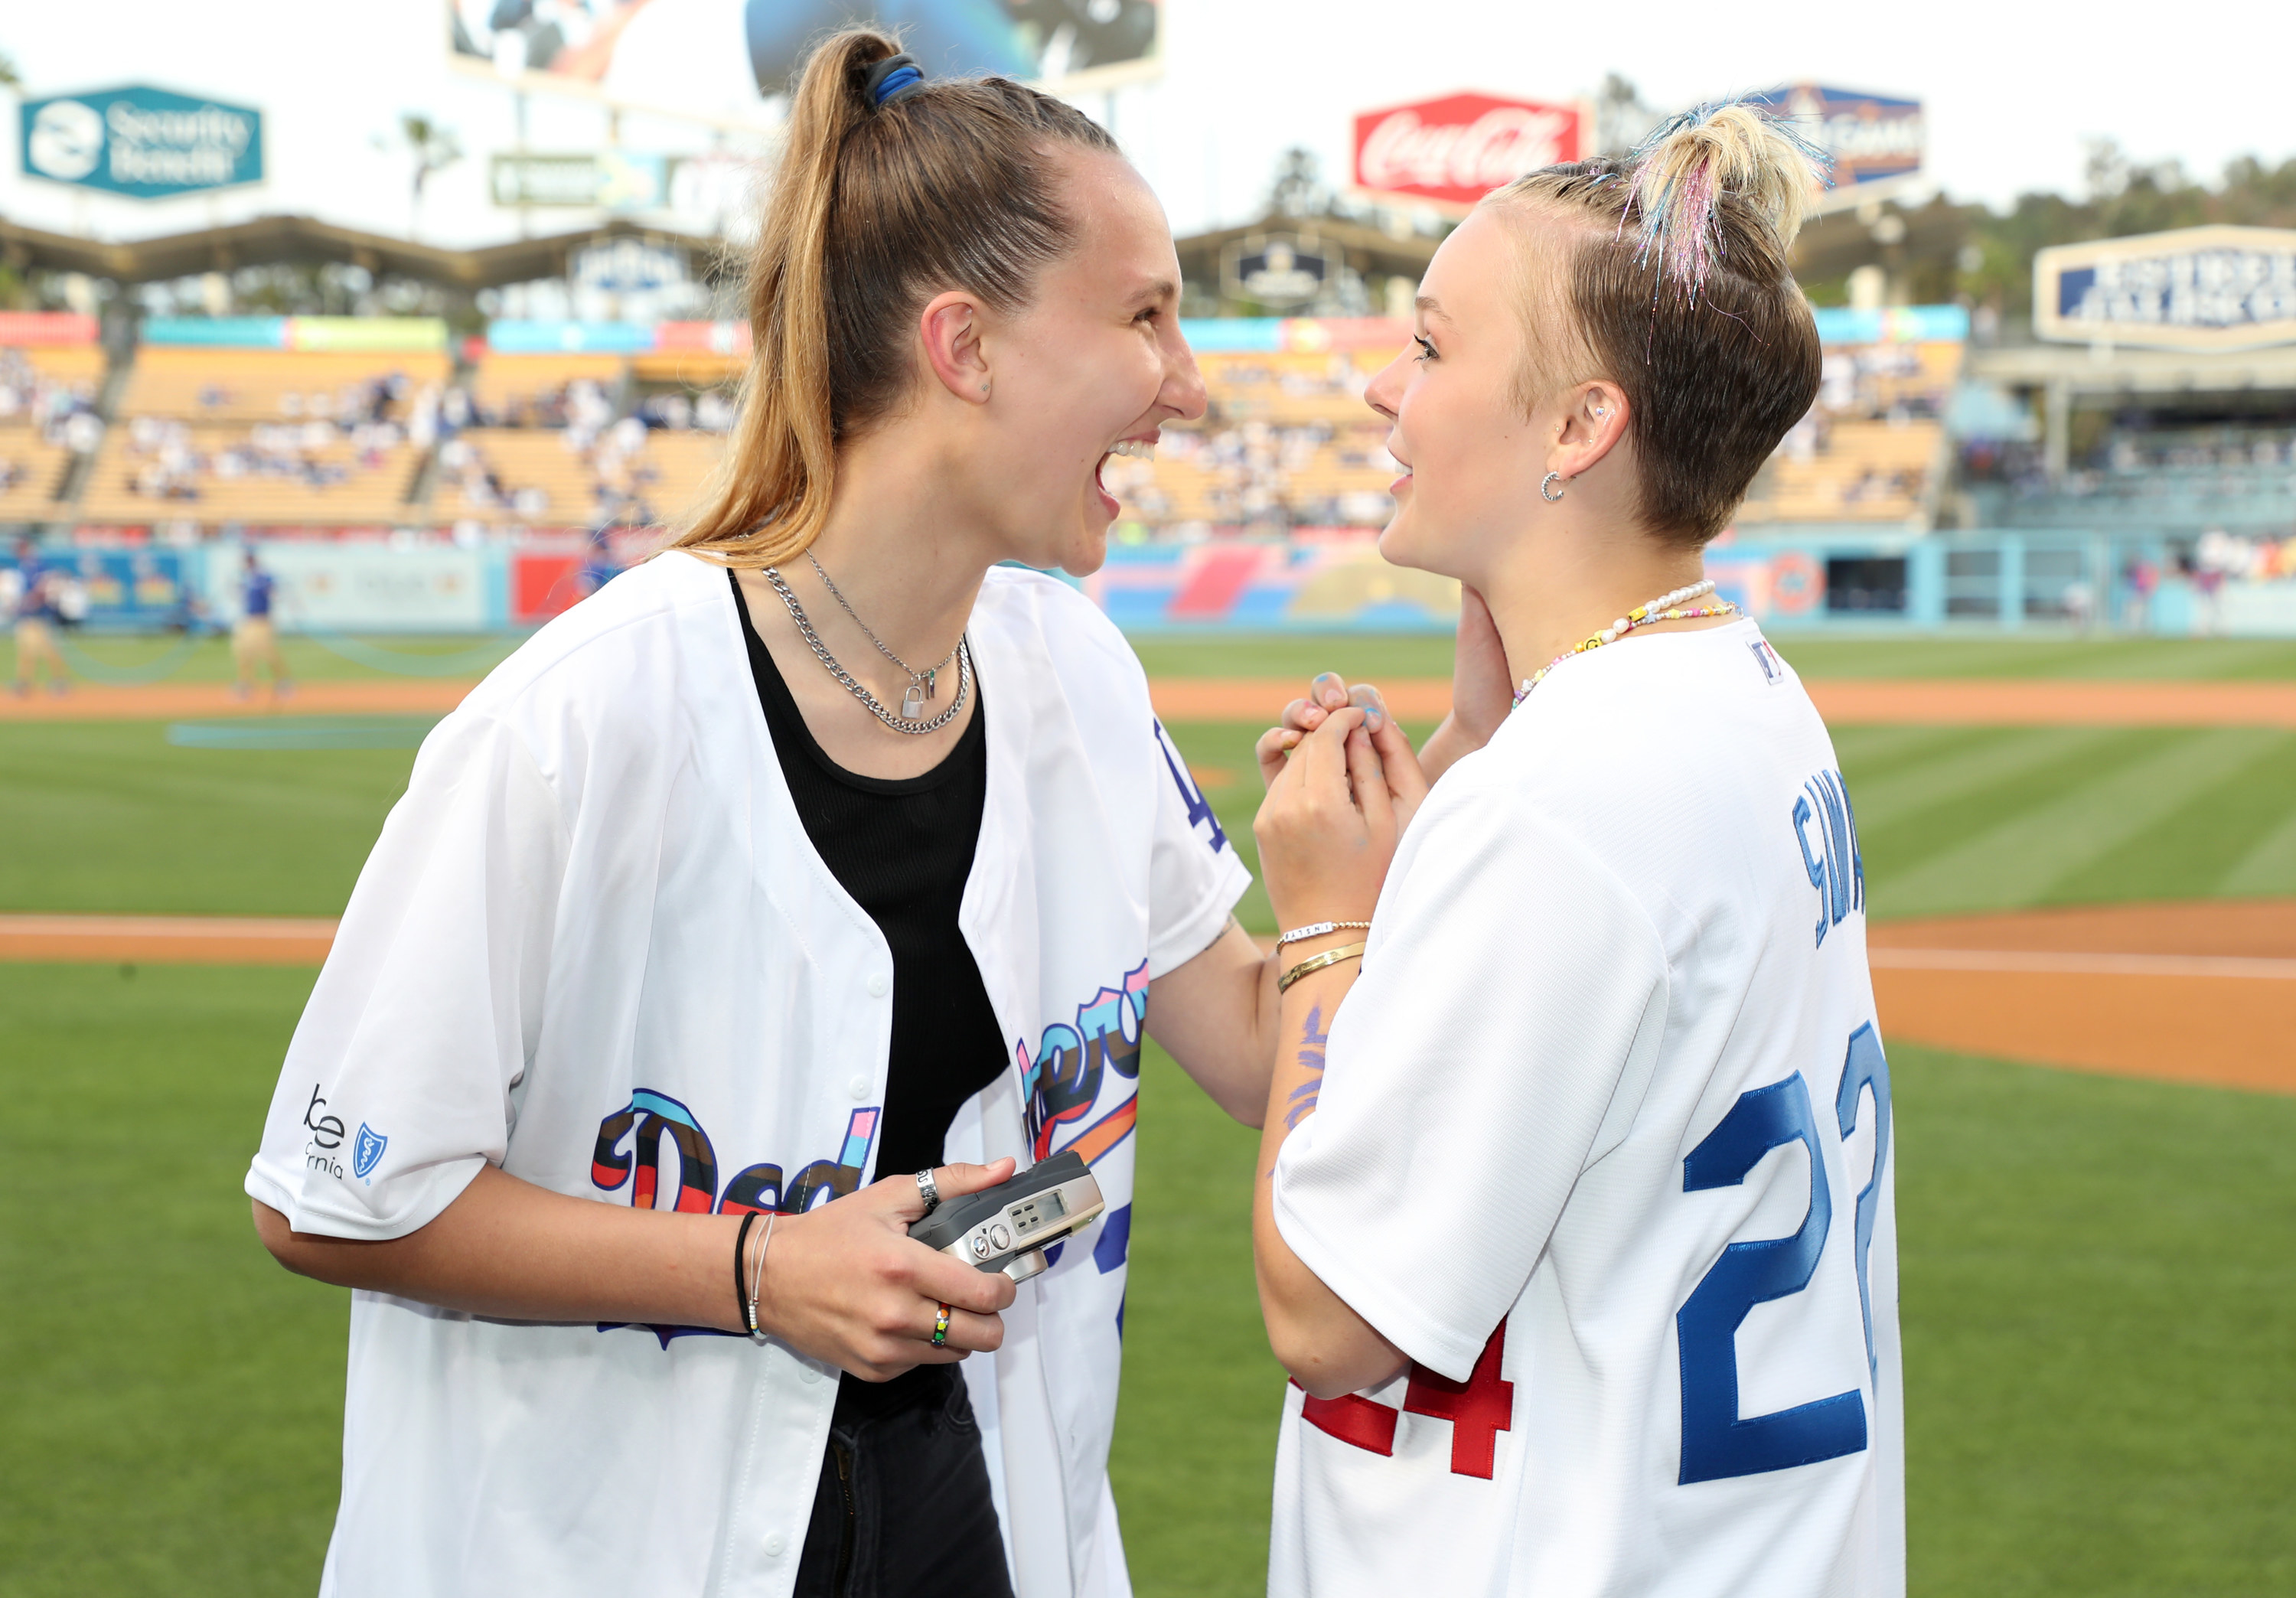 JoJo and Kylie standing on the field and laughing together